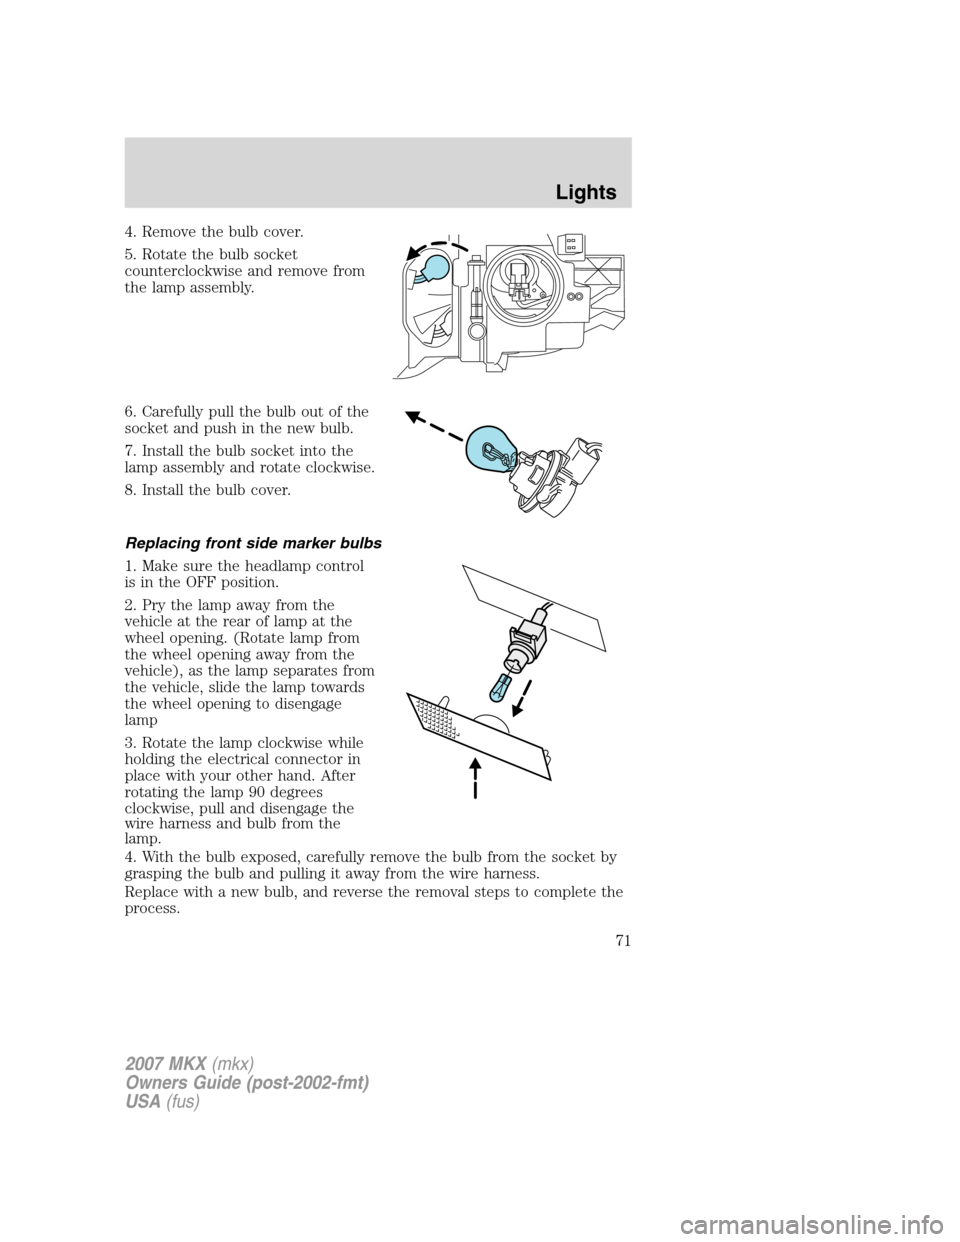 LINCOLN MKX 2007  Owners Manual 4. Remove the bulb cover.
5. Rotate the bulb socket
counterclockwise and remove from
the lamp assembly.
6. Carefully pull the bulb out of the
socket and push in the new bulb.
7. Install the bulb socke